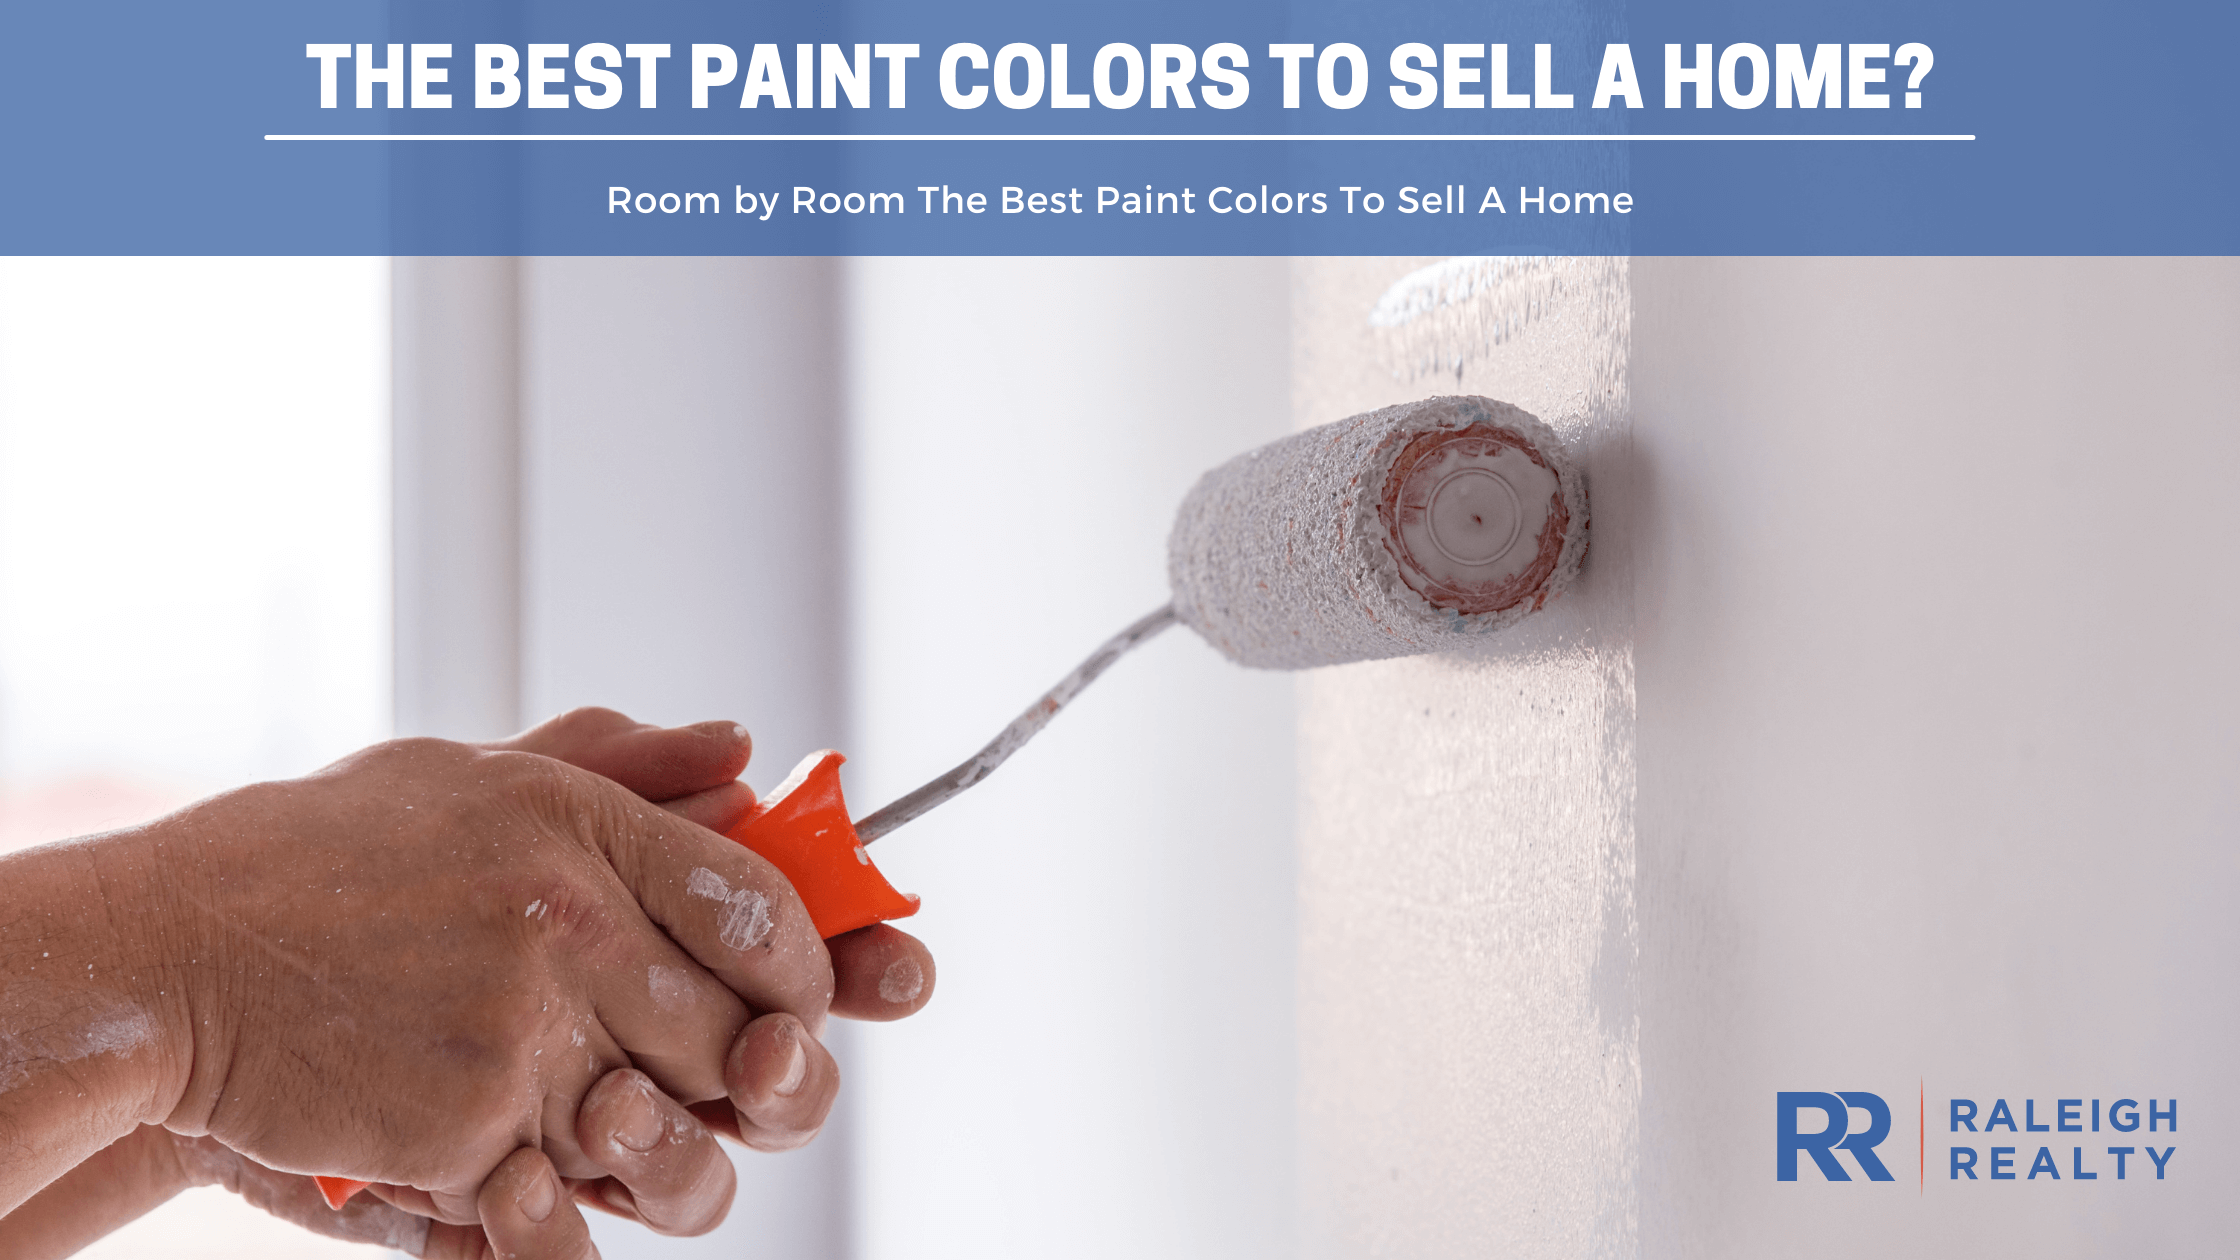 What Are The Best Colors To Paint to Sell a Home - Interior, Exterior and Room by Room Paint Colors